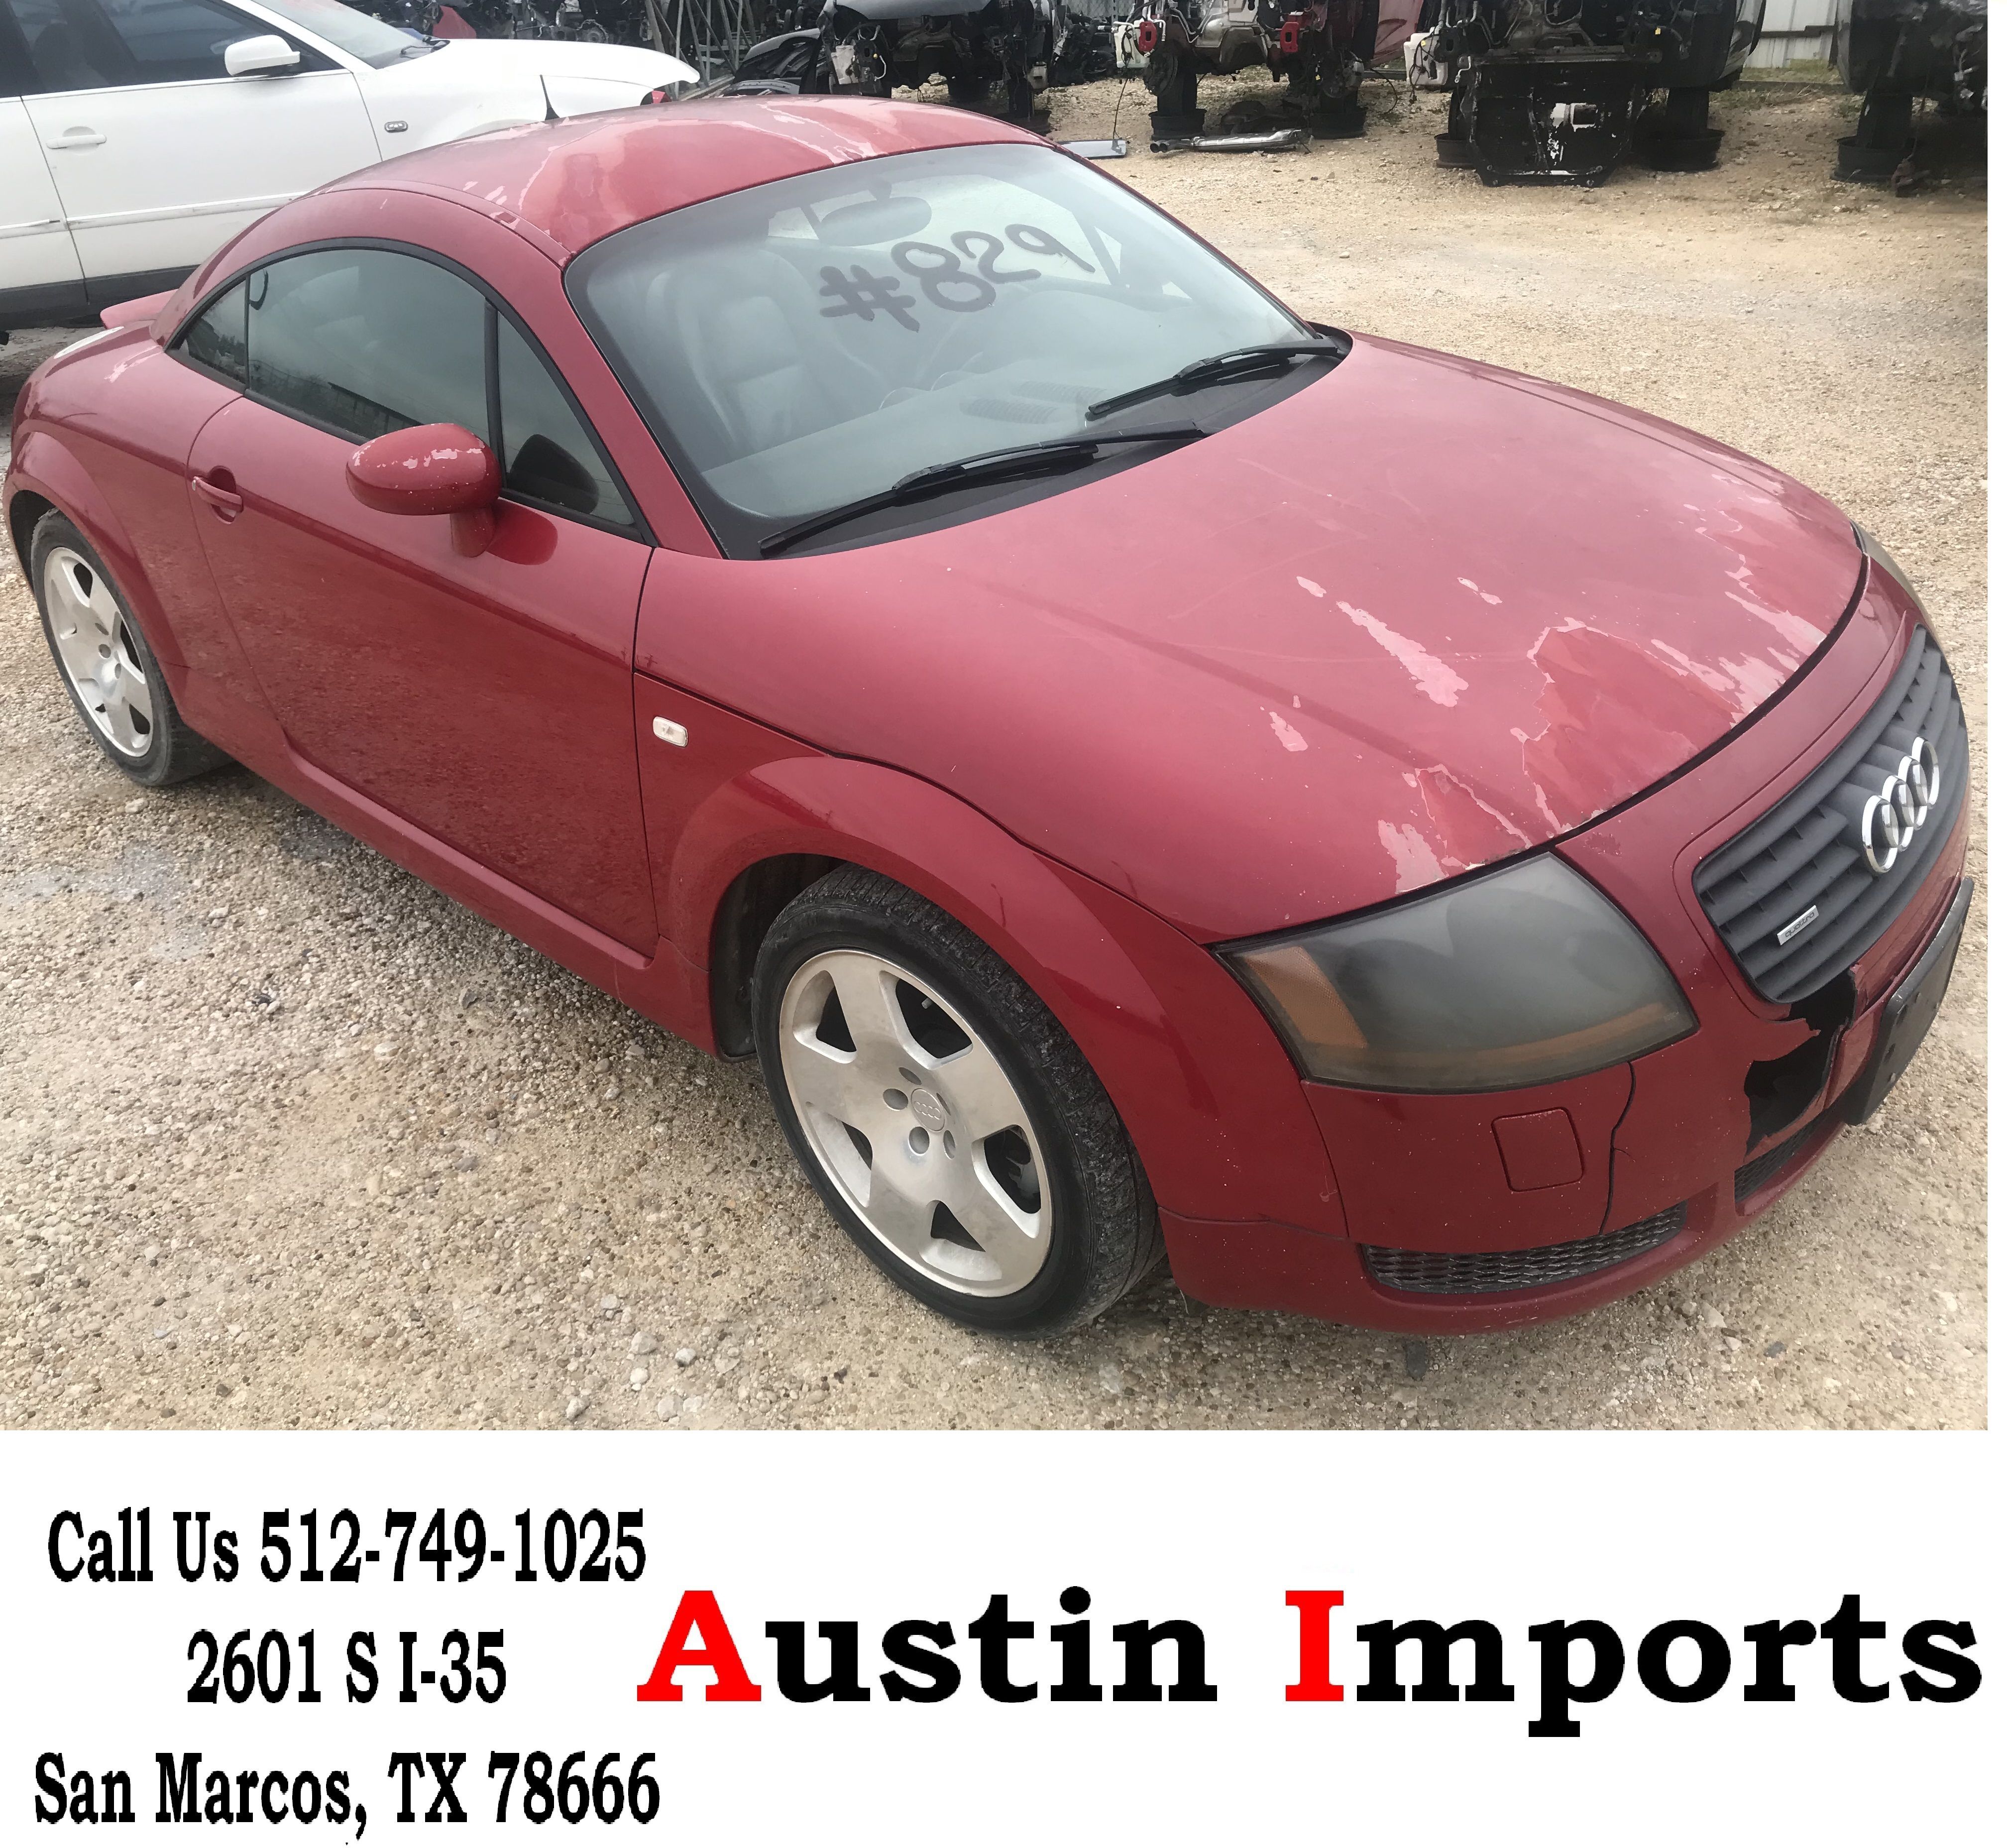 mk1 Audi TT 1.8 Turbo Quttro Parts Parting out Bumper Doors exhaust trunk fenders head lights stereo front rear left right glass engine brakes hatch